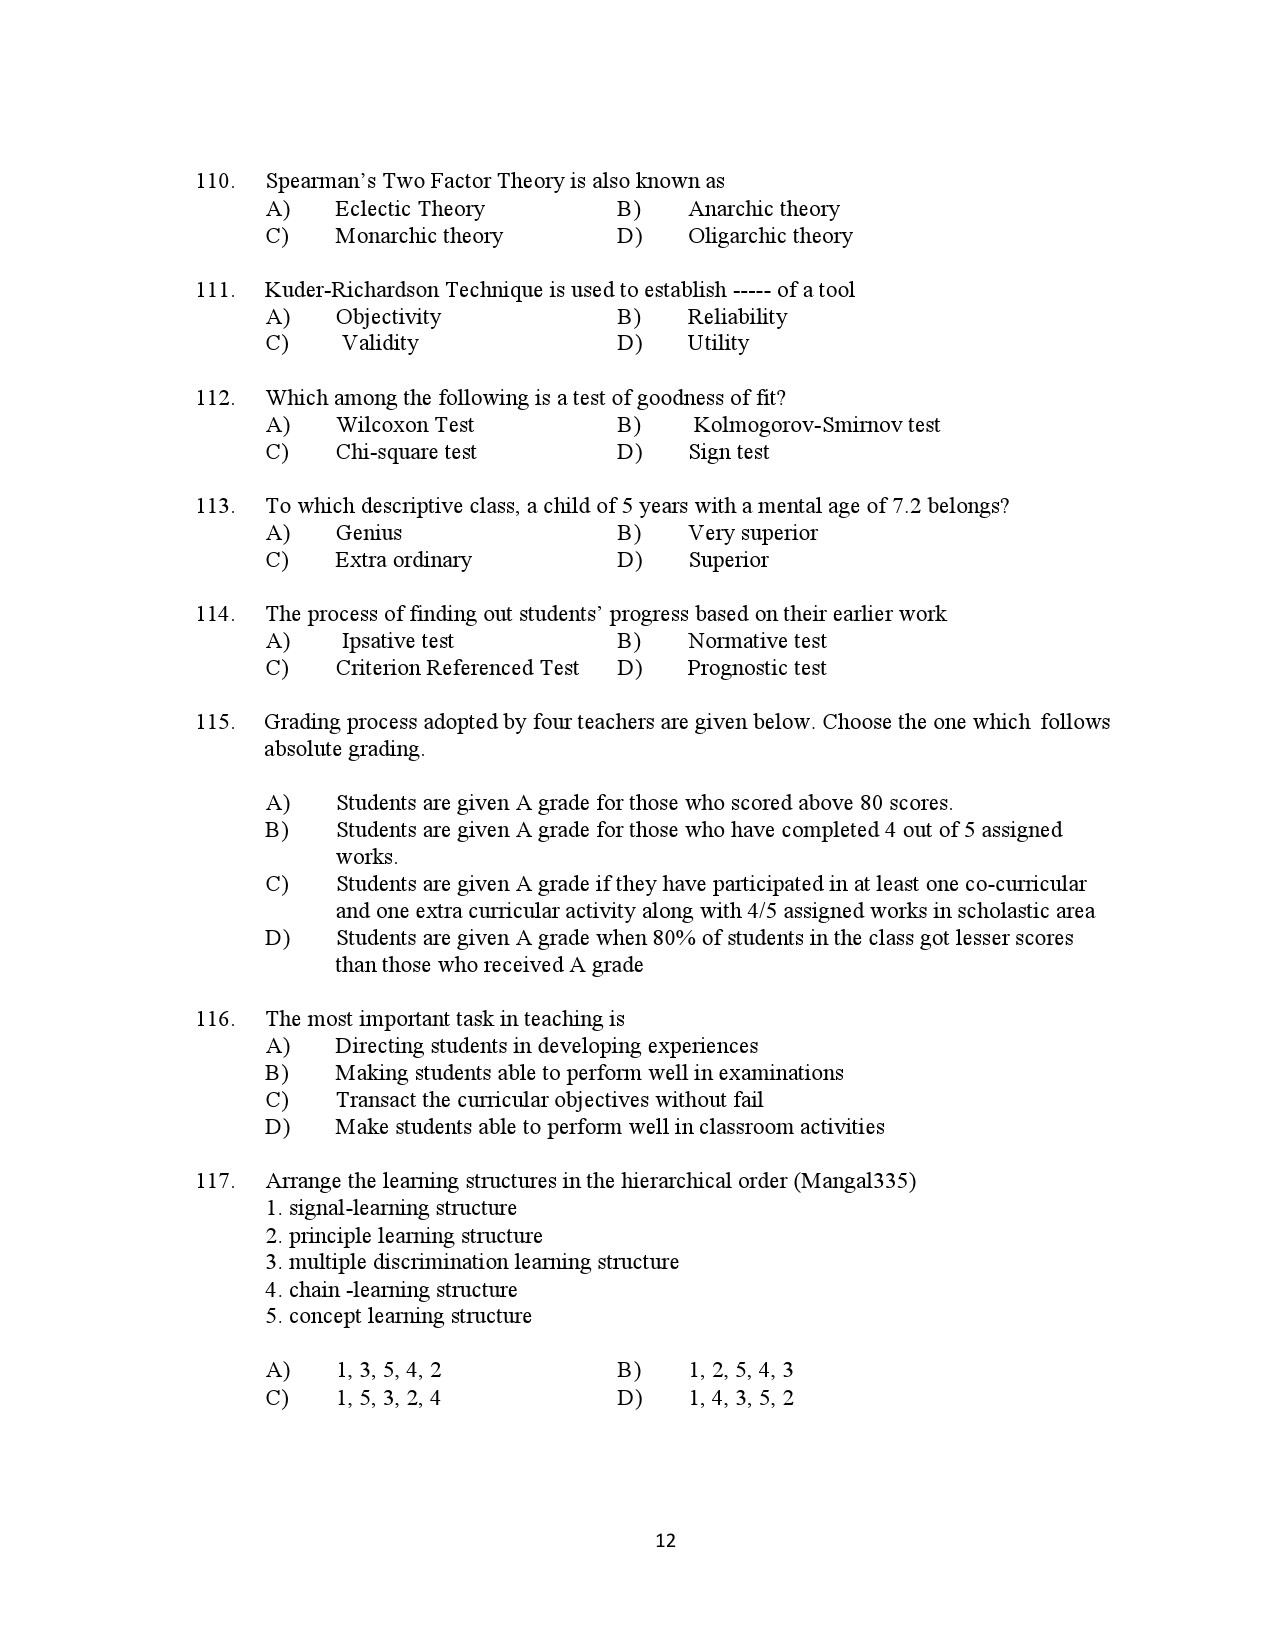 Kerala SET General Knowledge Exam Question Paper July 2021 12